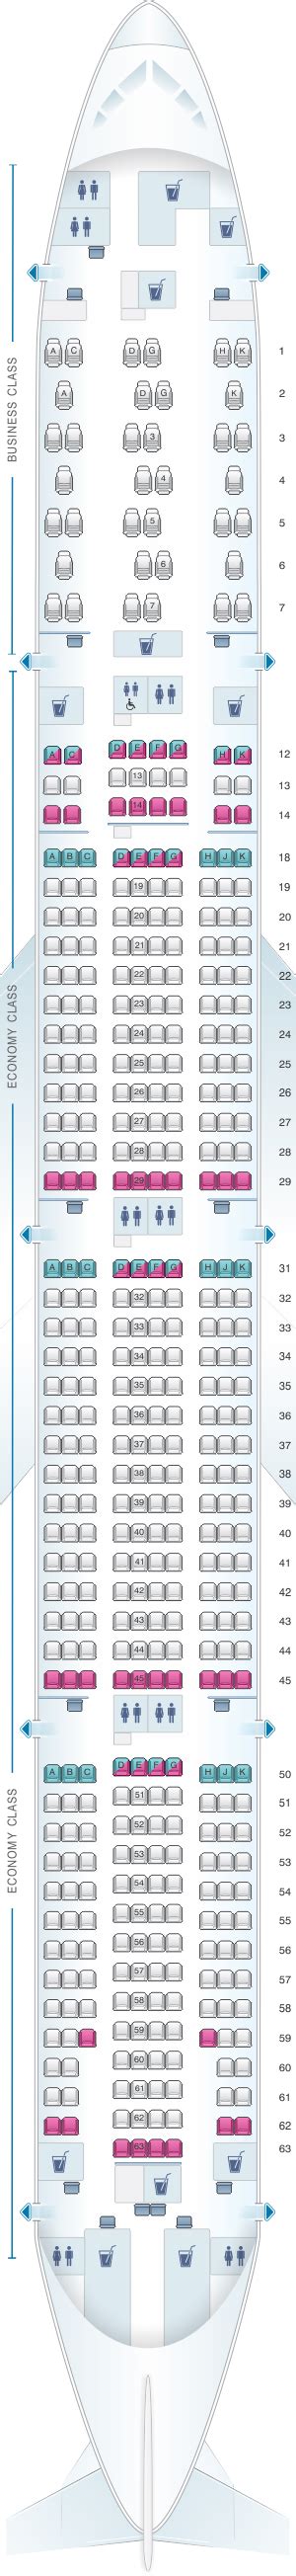 Aircraft 77w Seating Chart The Best And Latest Aircraft 2019